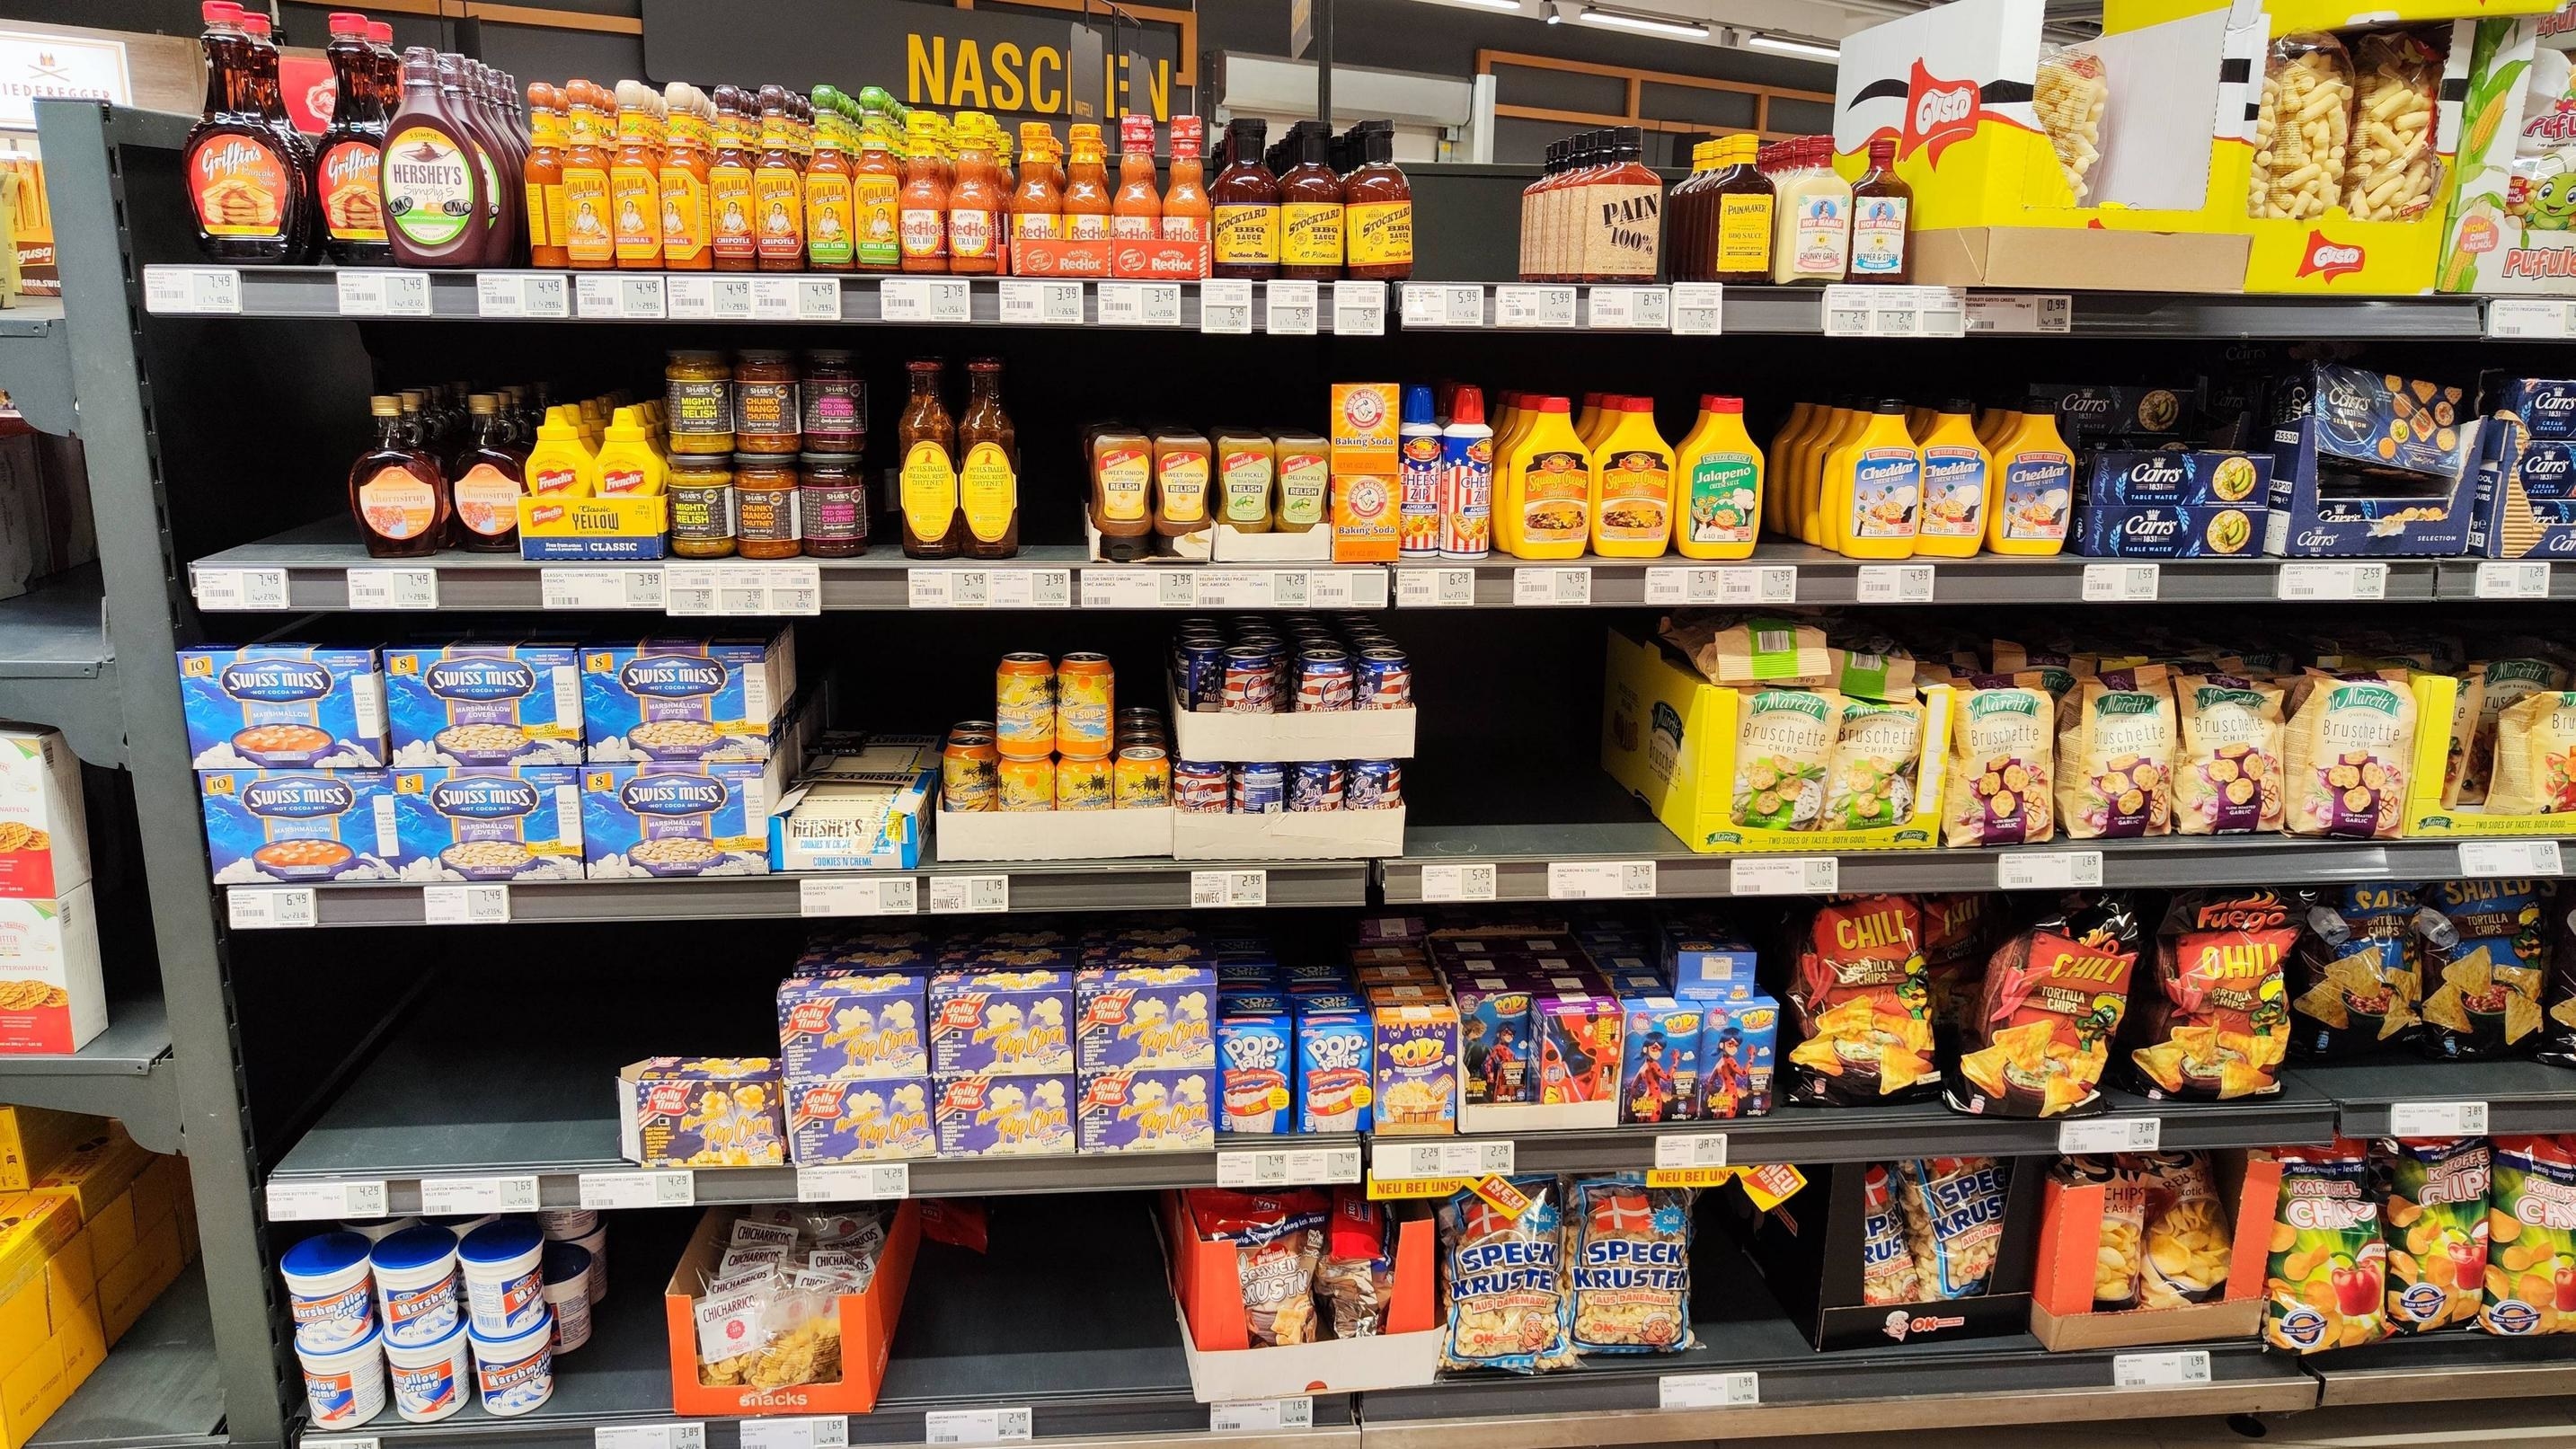 Shelves with popcorn, mustard, Pop-Tarts, and other American products